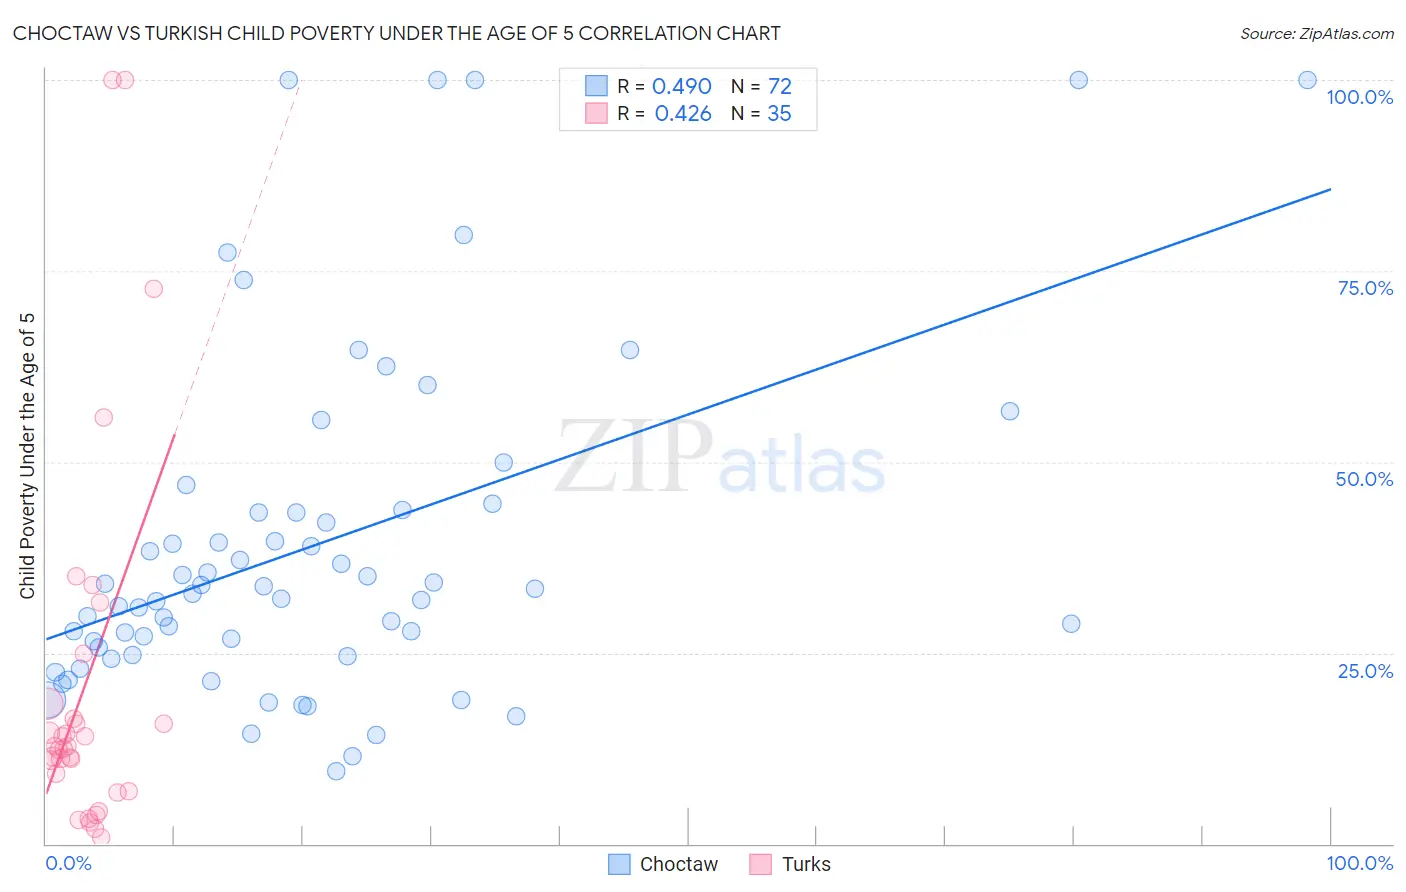 Choctaw vs Turkish Child Poverty Under the Age of 5